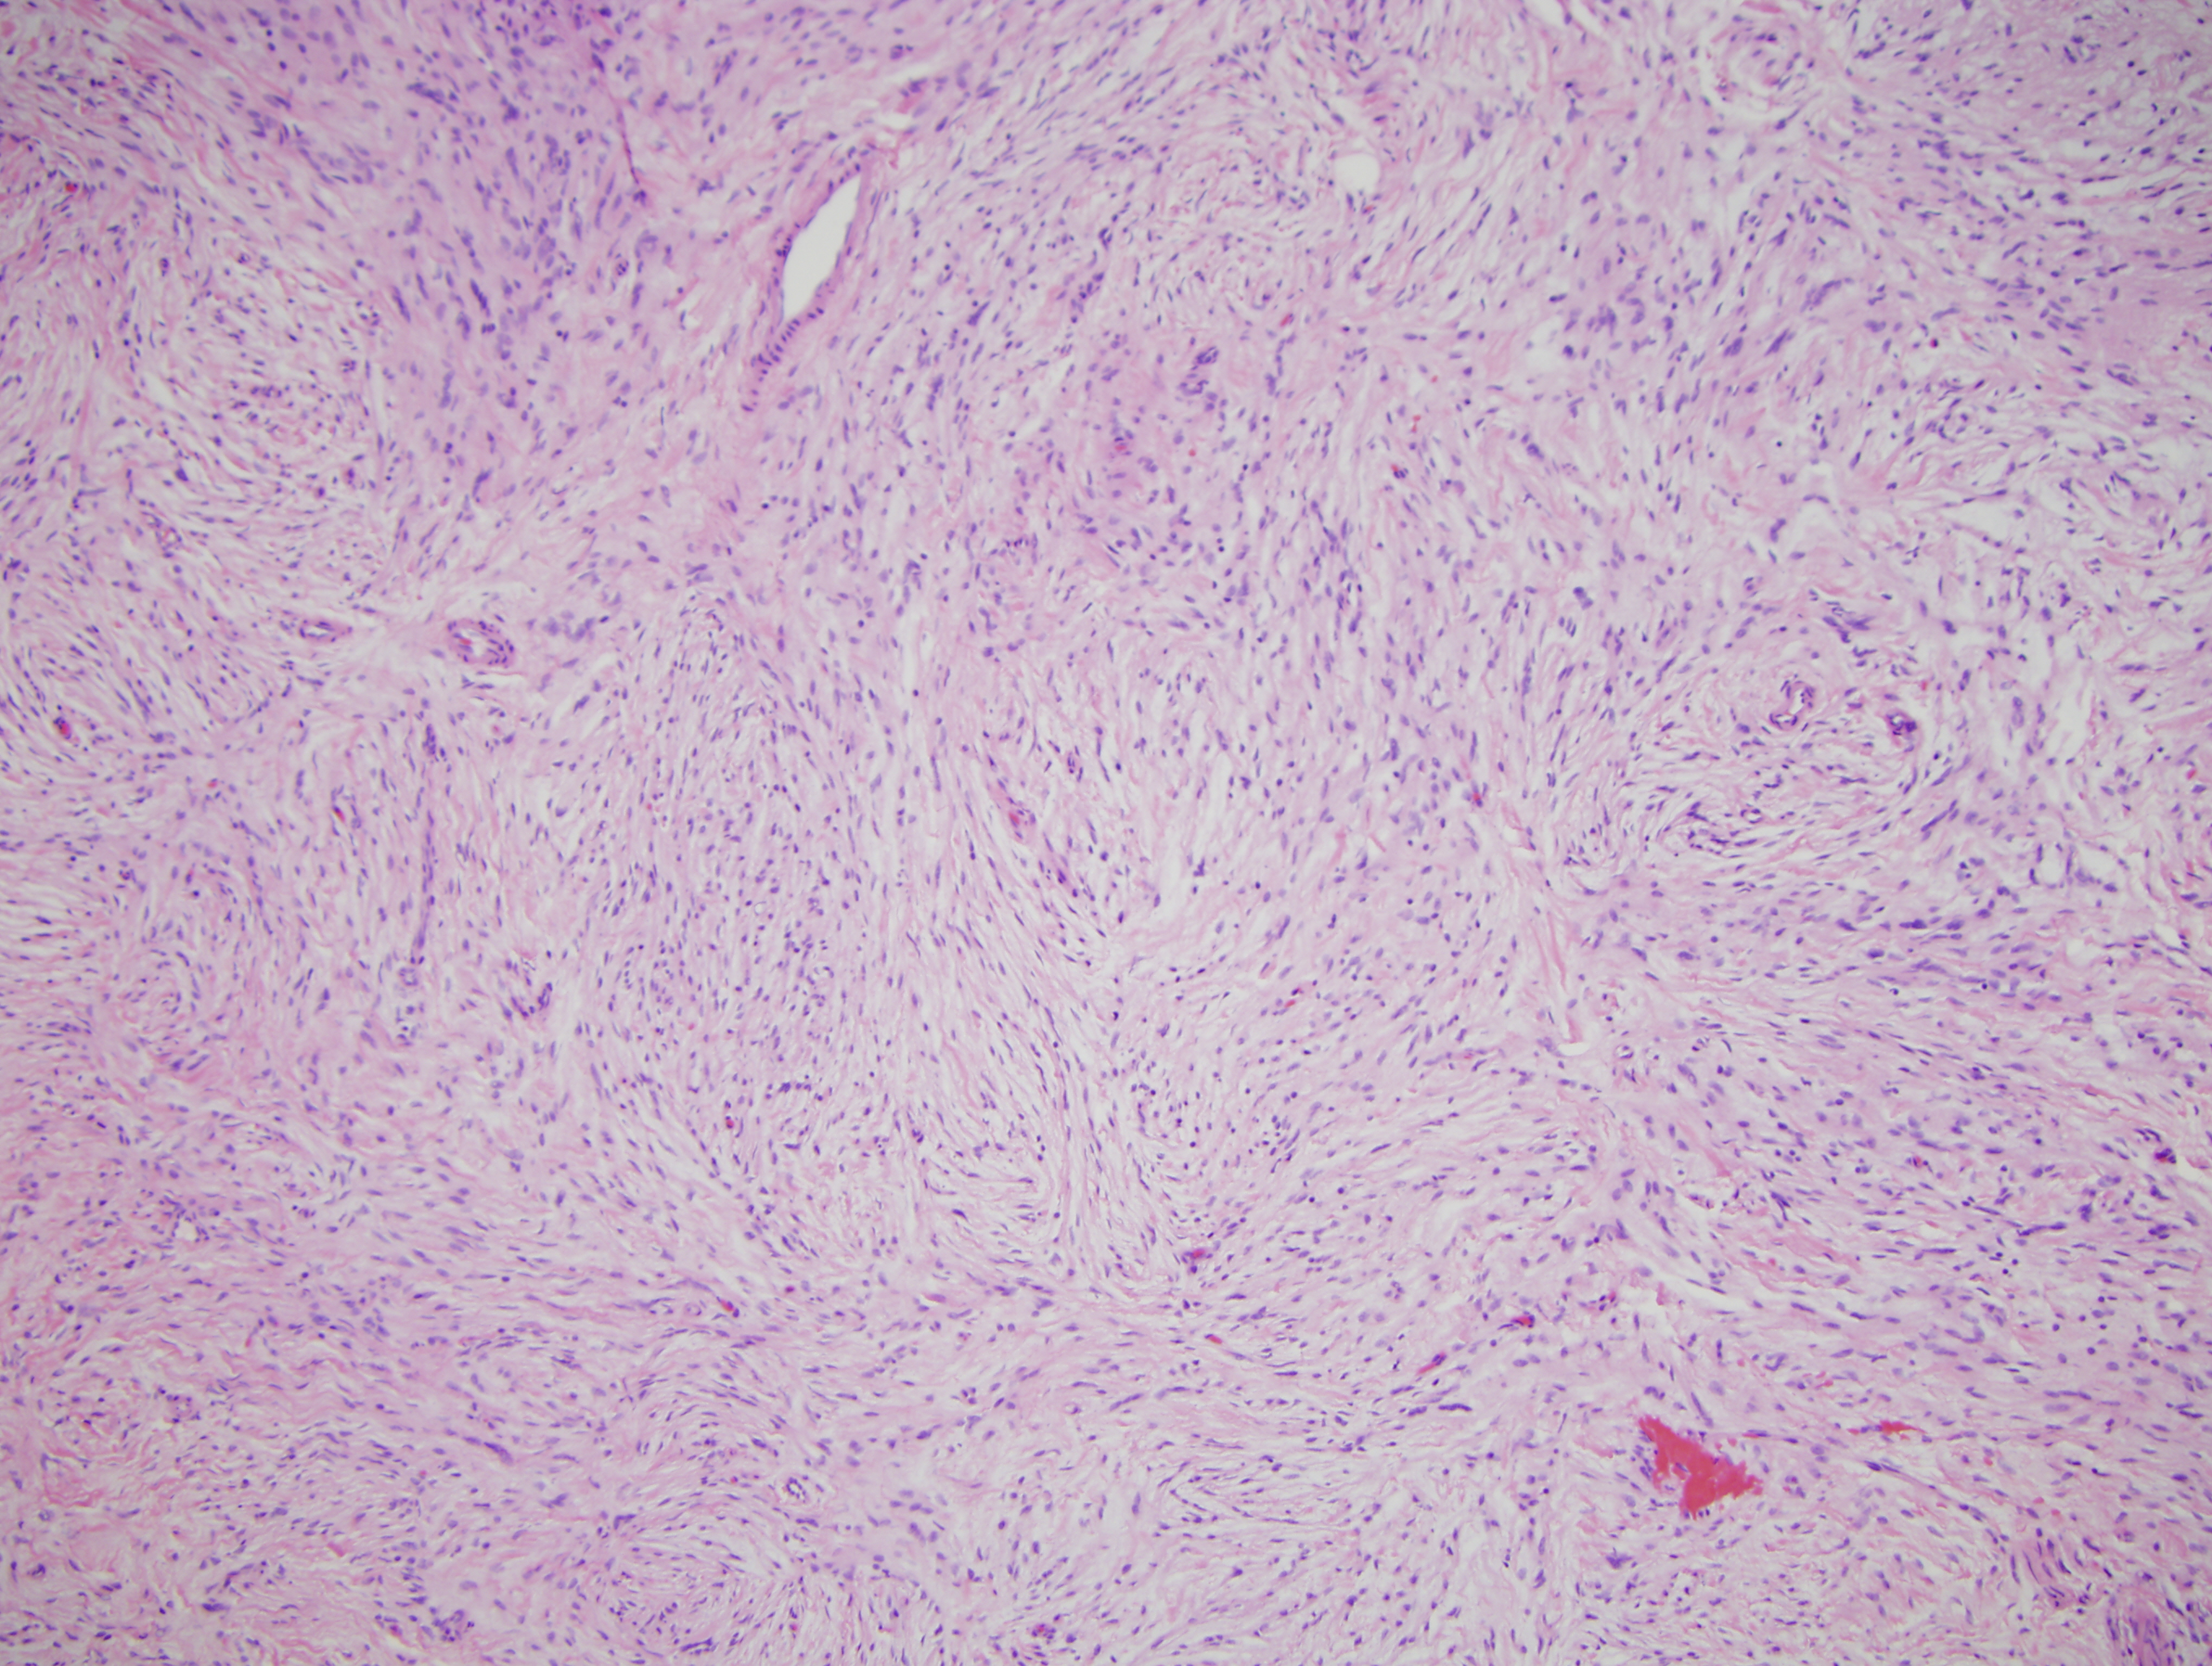 Slide 3: This lesion although being very extensive and of moderate cellularity is quite bland.